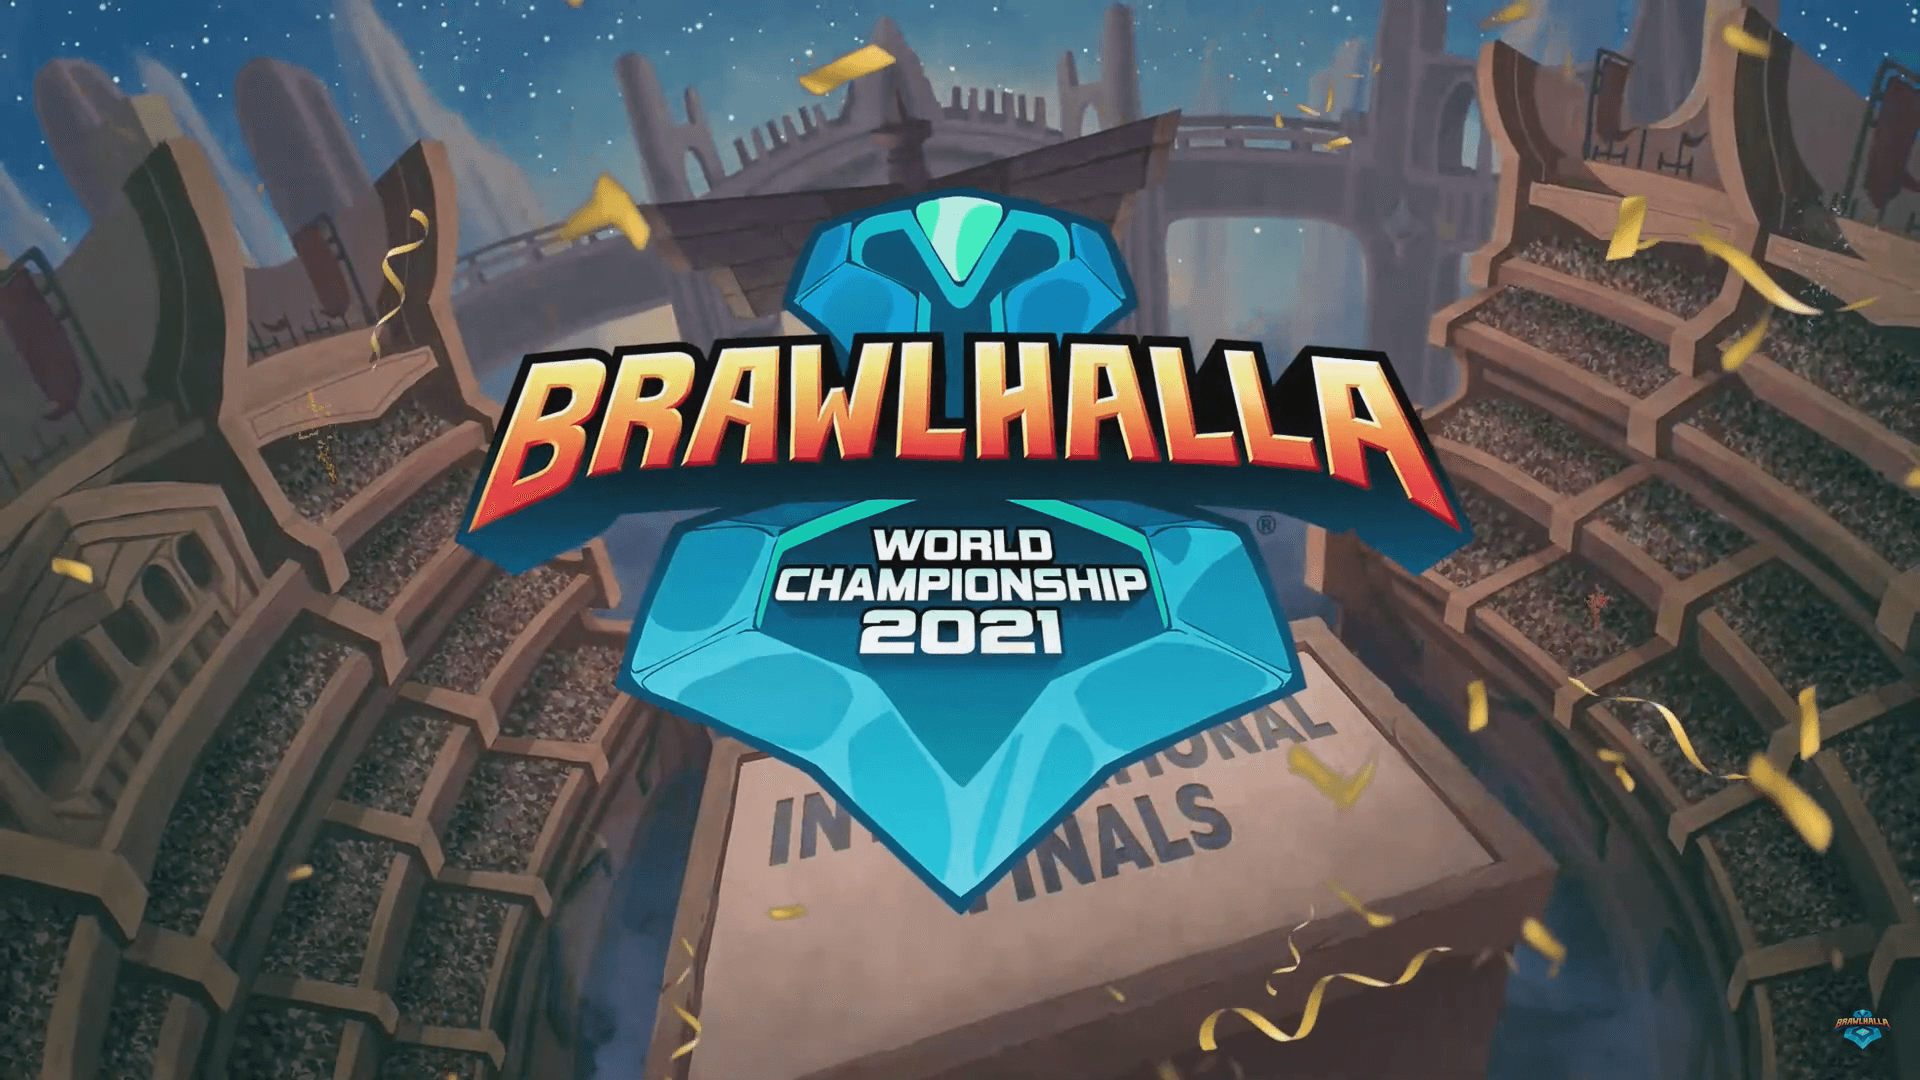 Four Finals of Brawlhalla World Championship (one more to go)